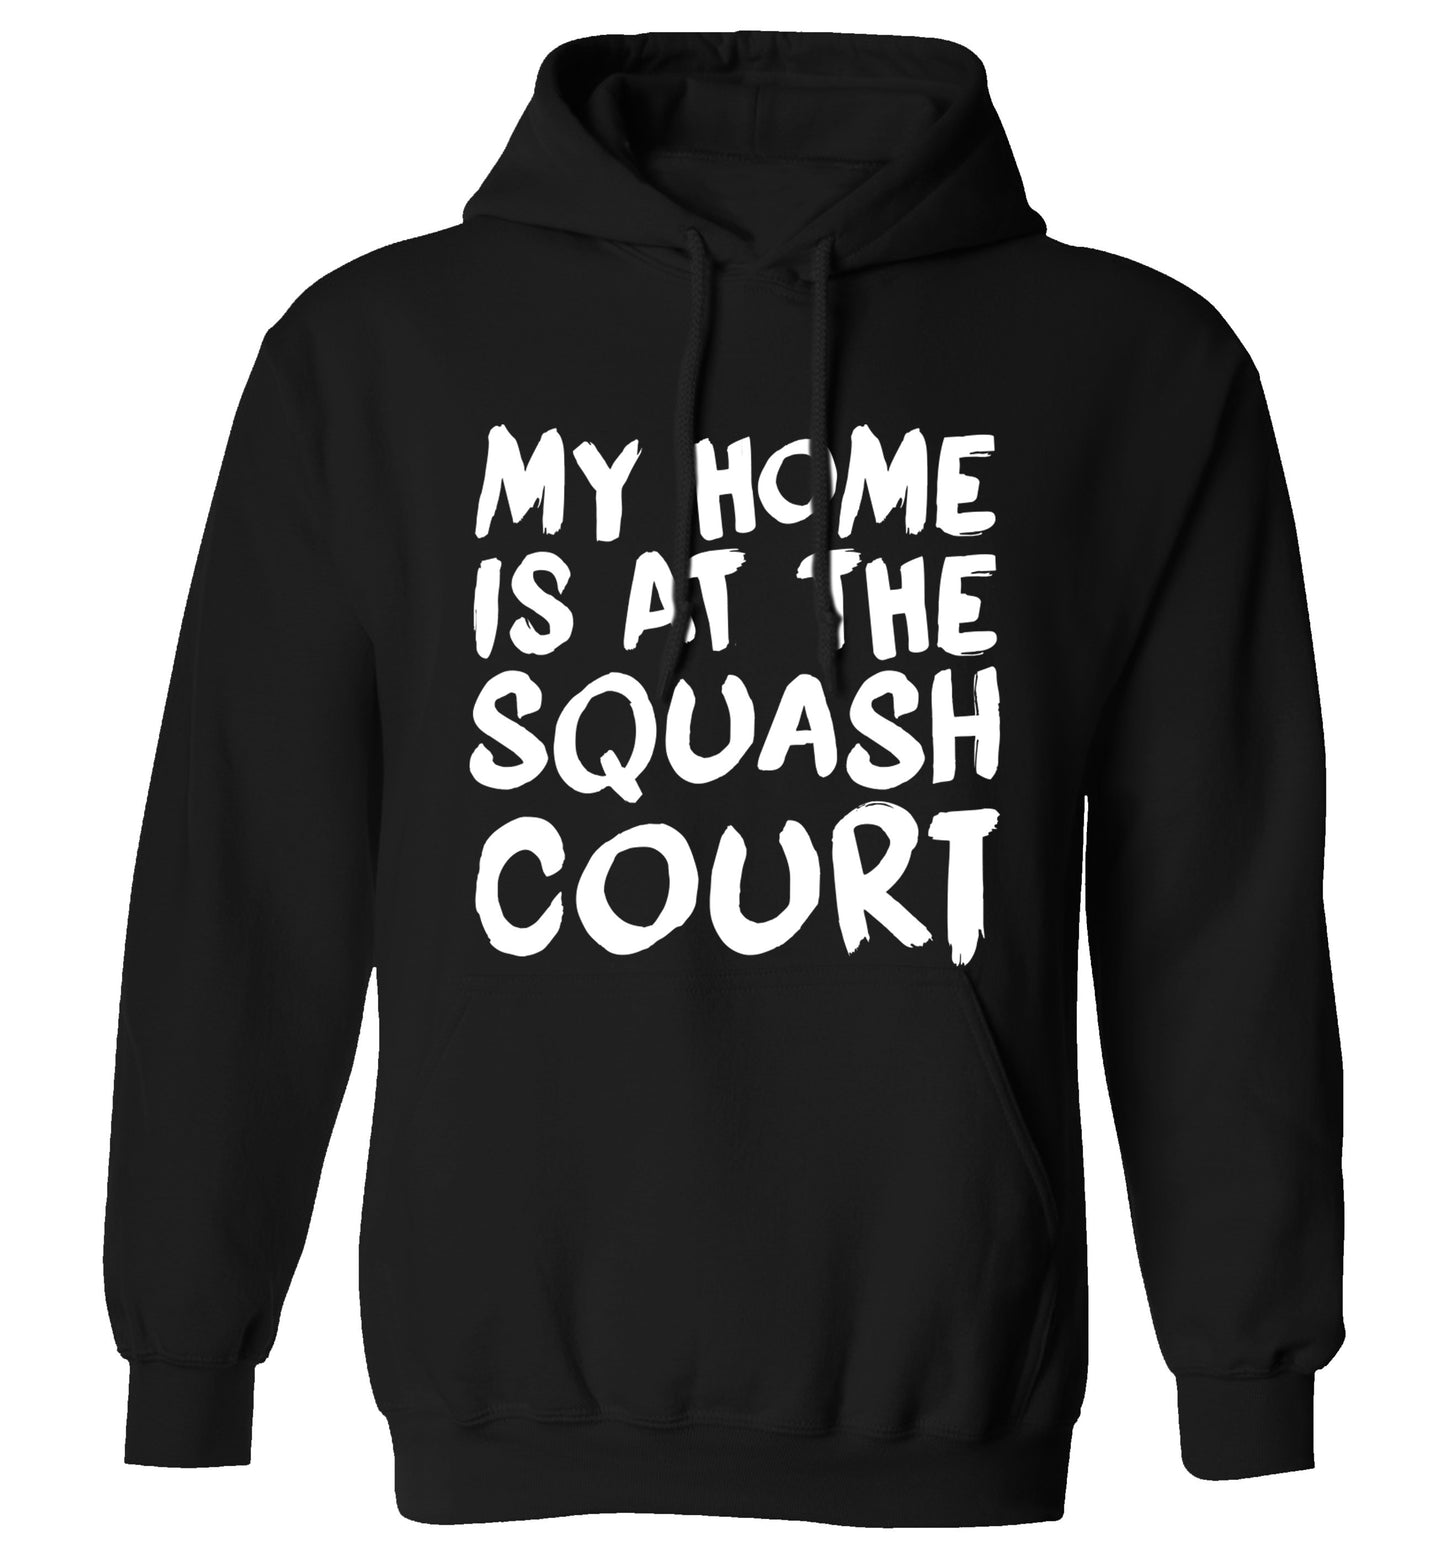 My home is at the squash court adults unisex black hoodie 2XL